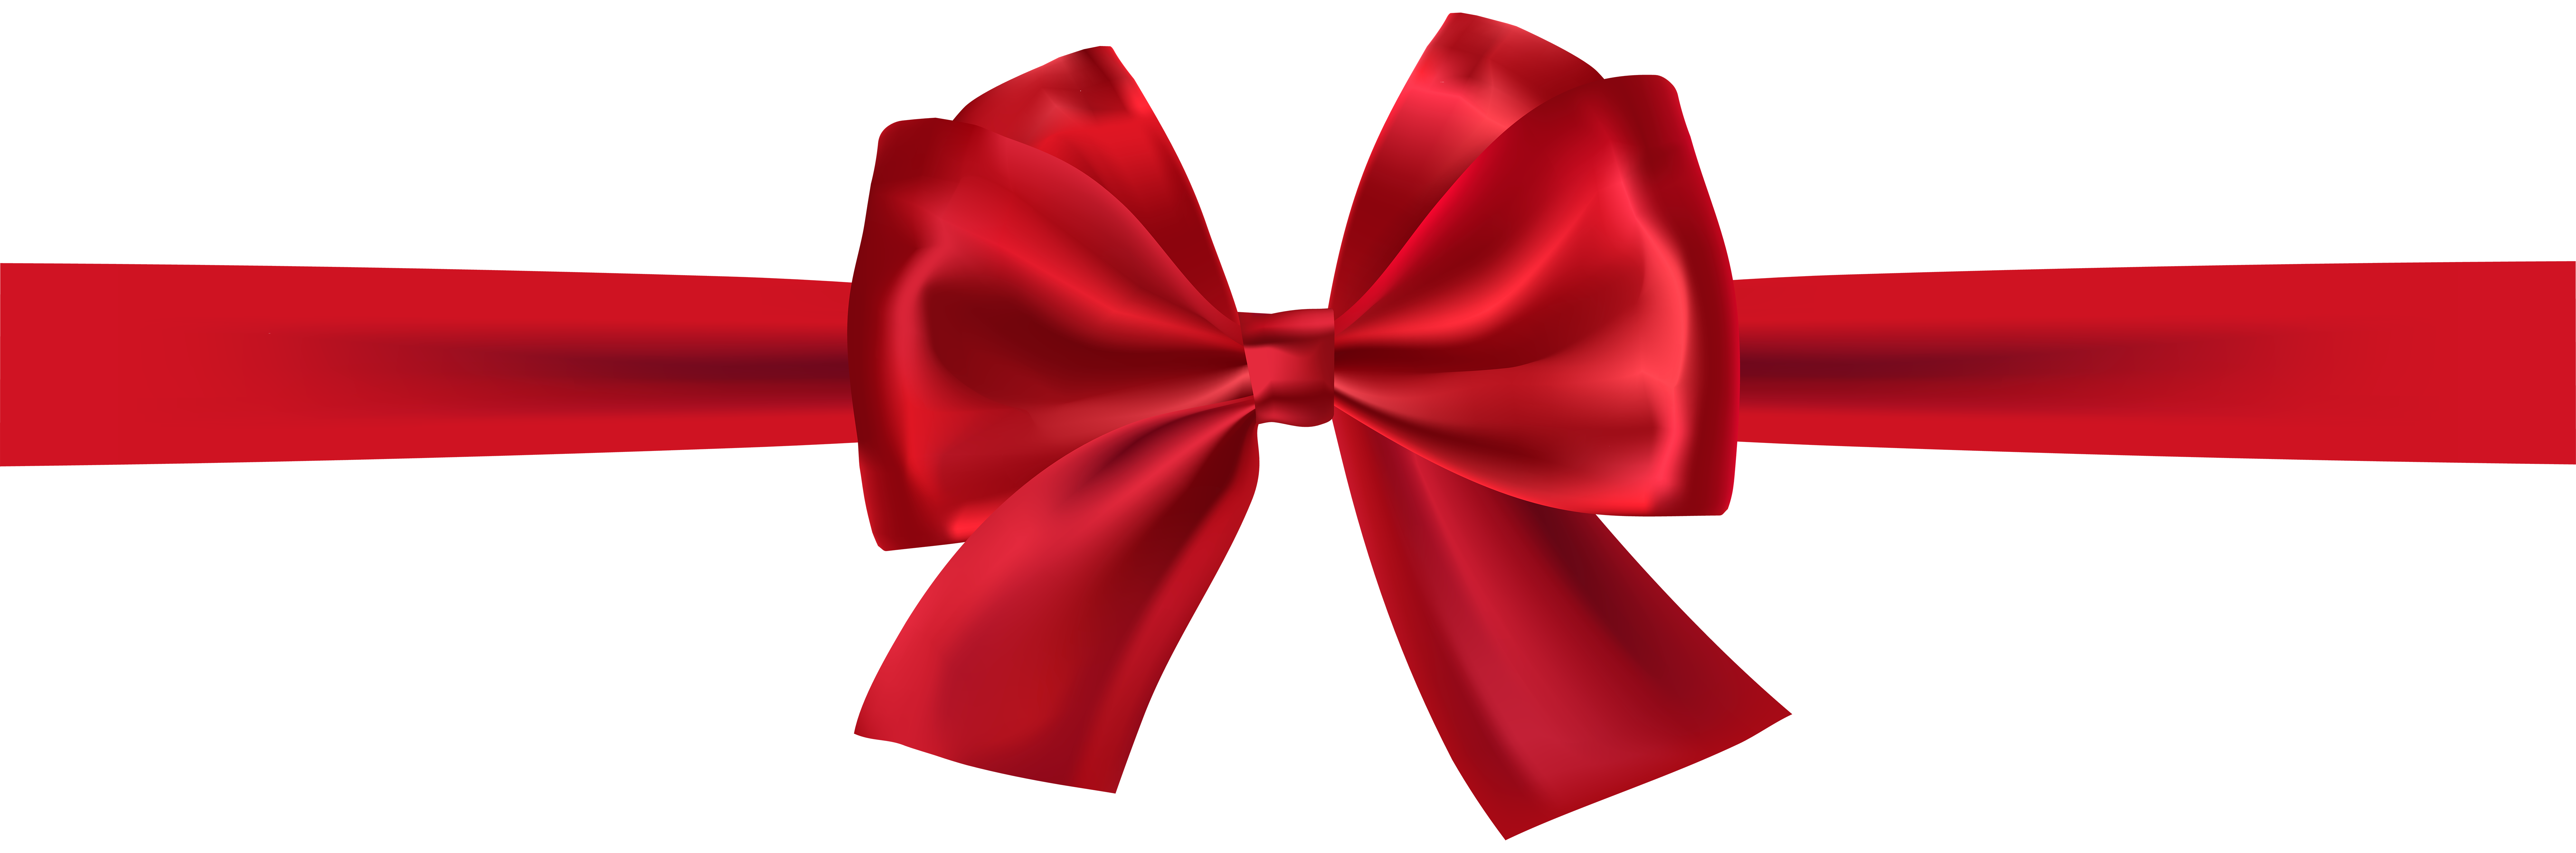 red ribbon bow PNG transparent image download, size: 8000x2650px